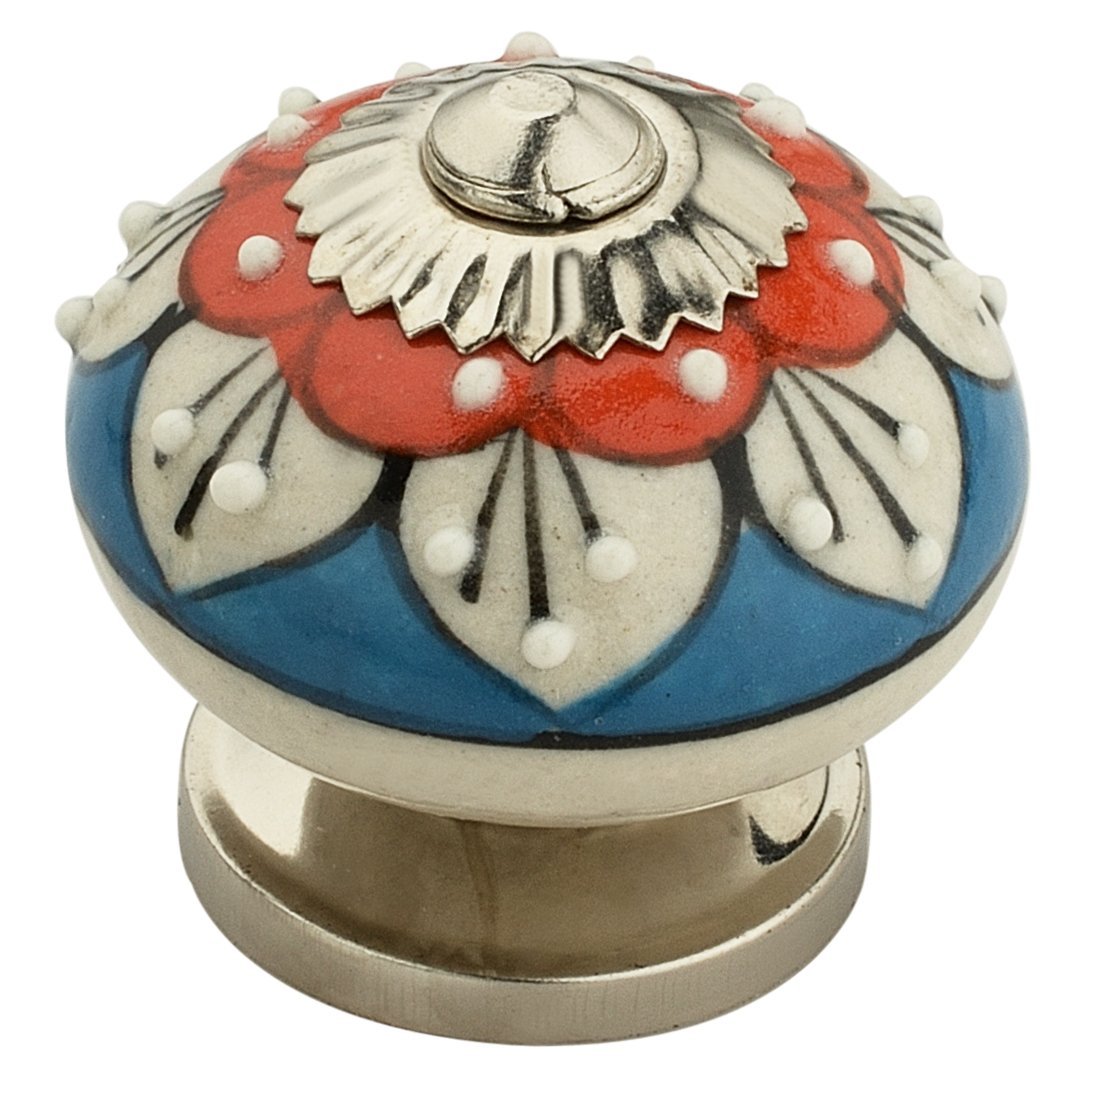 Ck354 1.57 In. Stone Pattern Round Cabinet Knob, Red & Blue - Pack Of 5